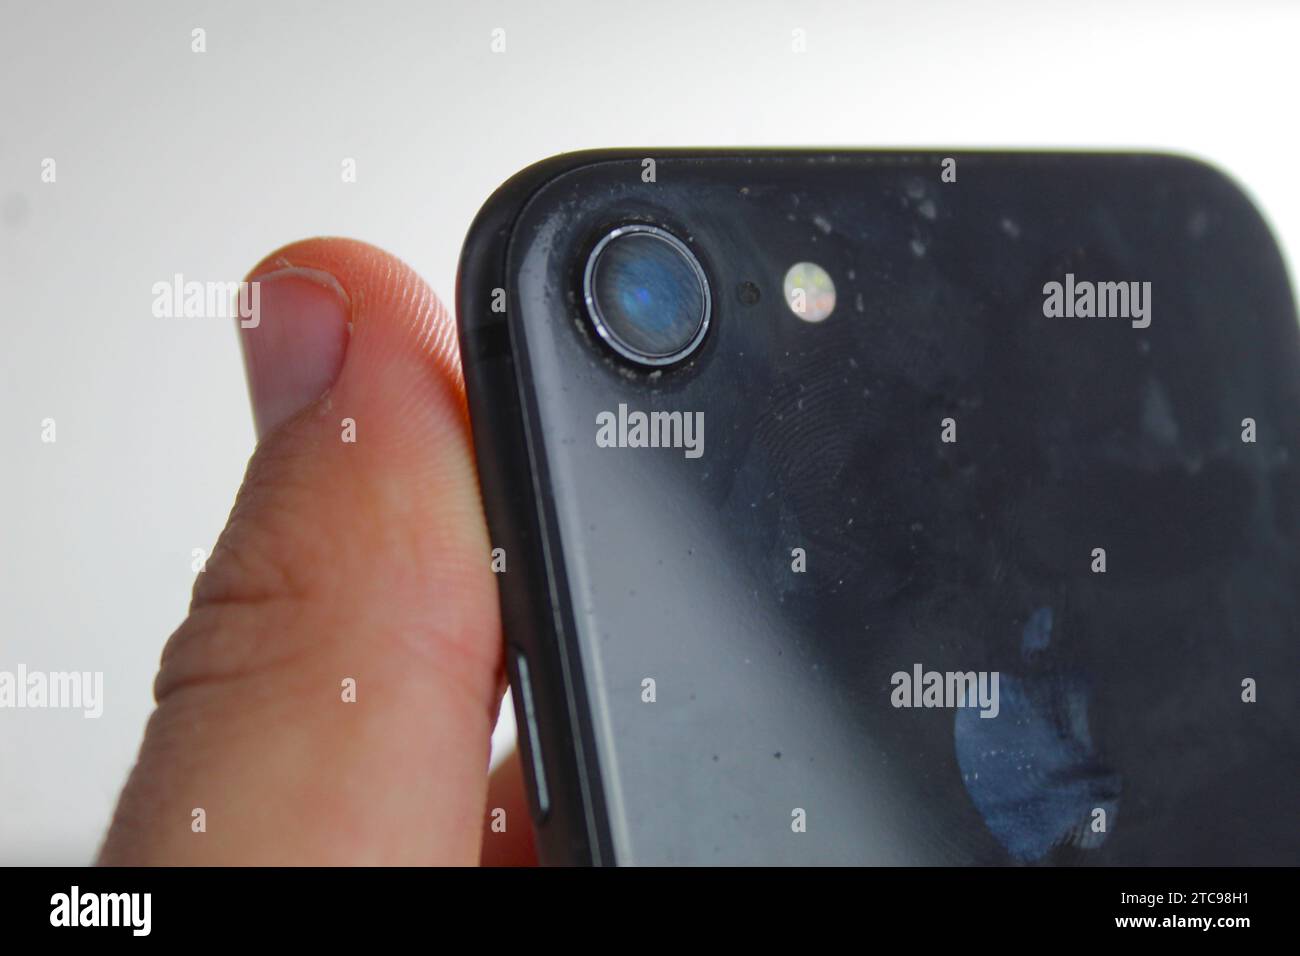 A close up photo of the camera on the outside of a black iPhone 8. Stock Photo